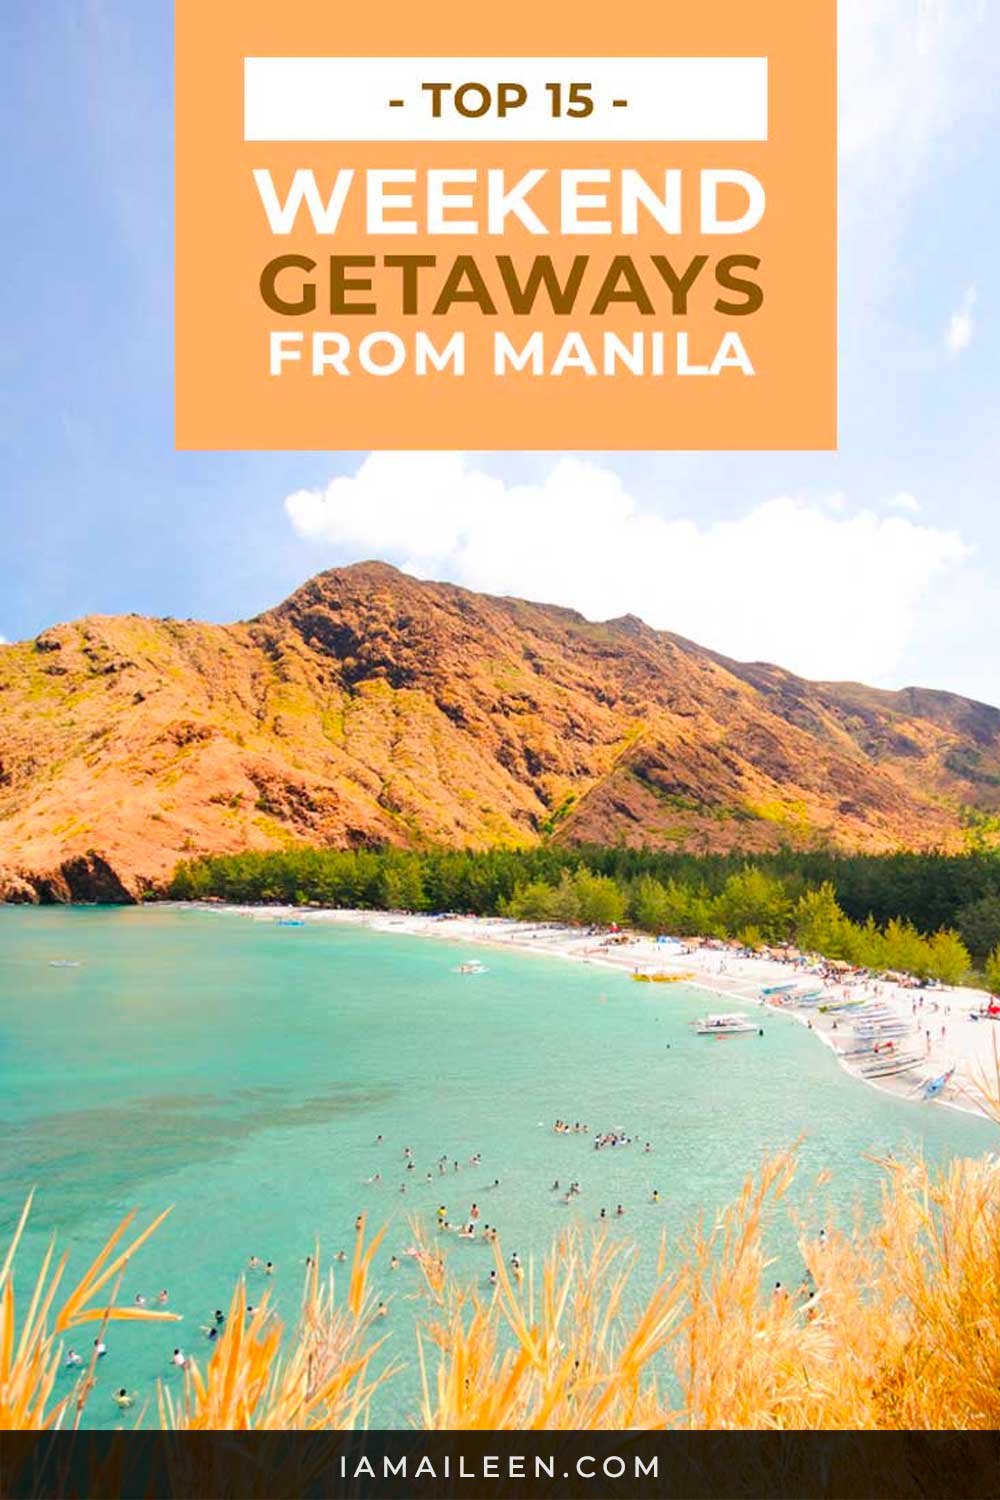 Top 15 Destinations for Weekend Getaways from Manila (Philippines)